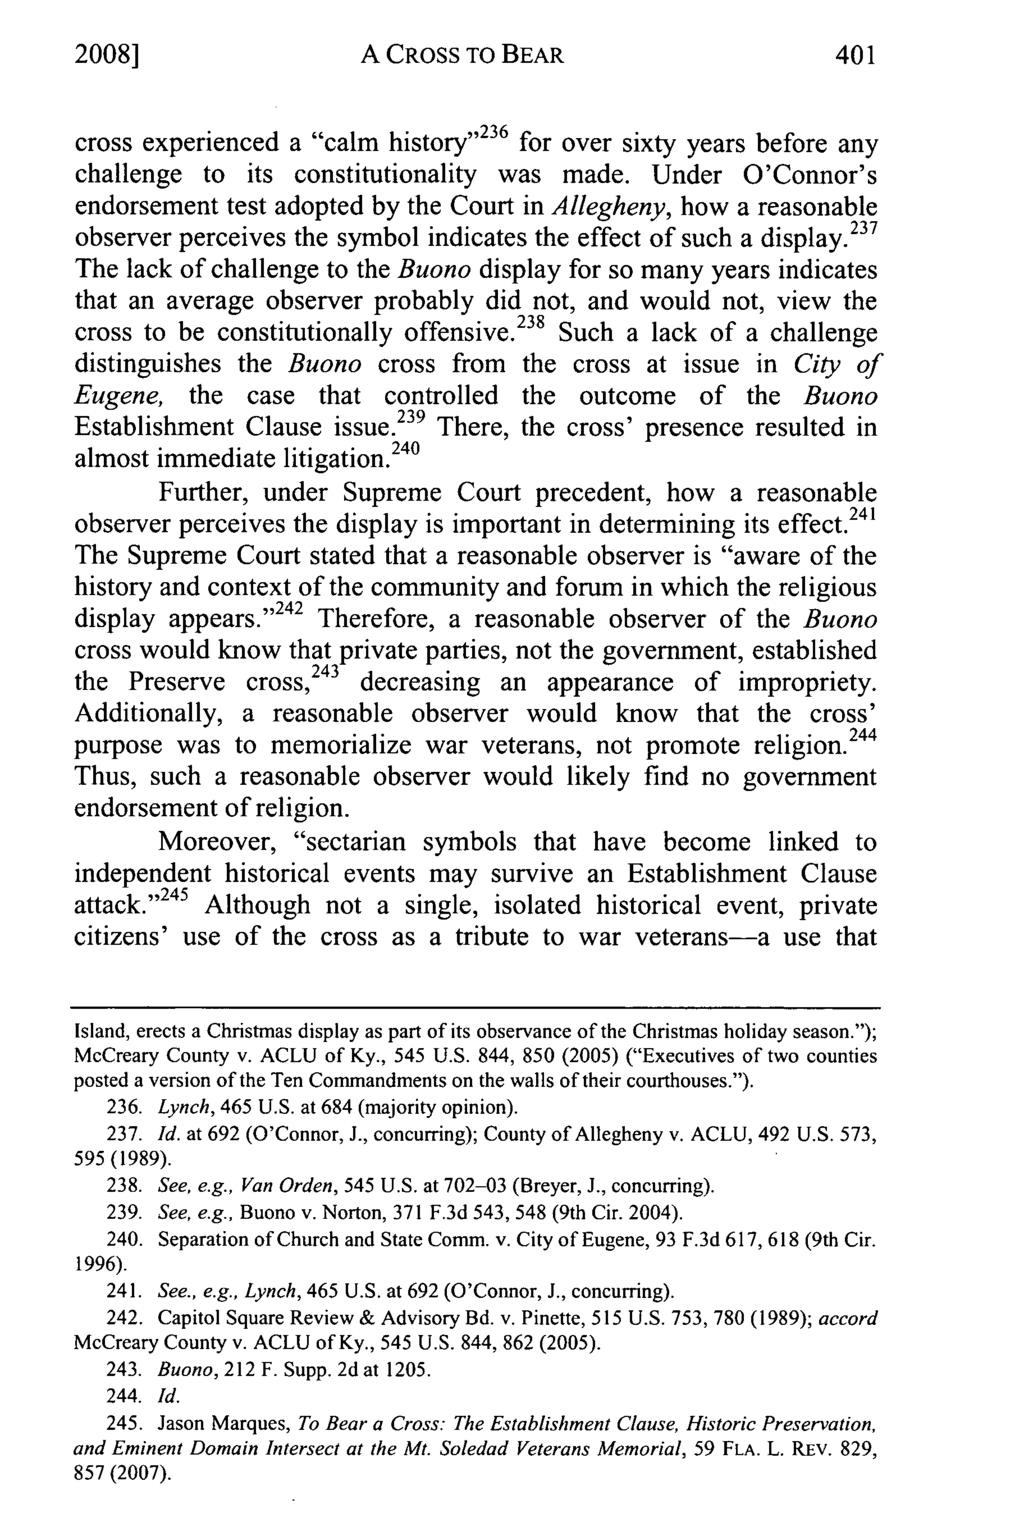 2008] A CROSS TO BEAR cross experienced a "calm history" 236 for over sixty years before any challenge to its constitutionality was made.